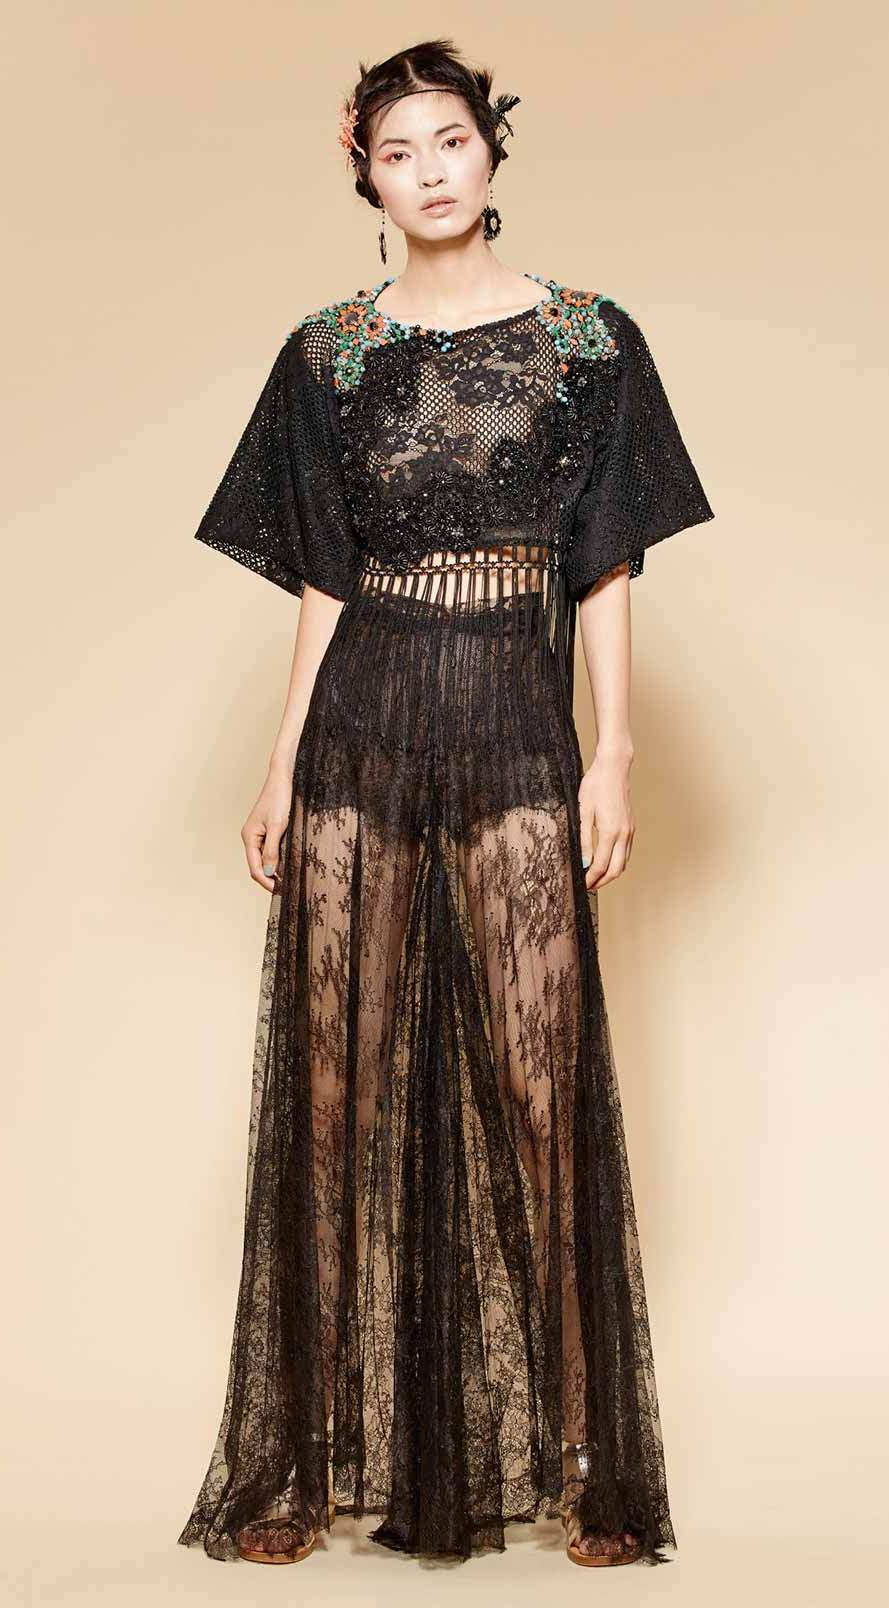 Black party outfit with Japanese sleeve lace blouse and hand-embroidered semiprecious stones